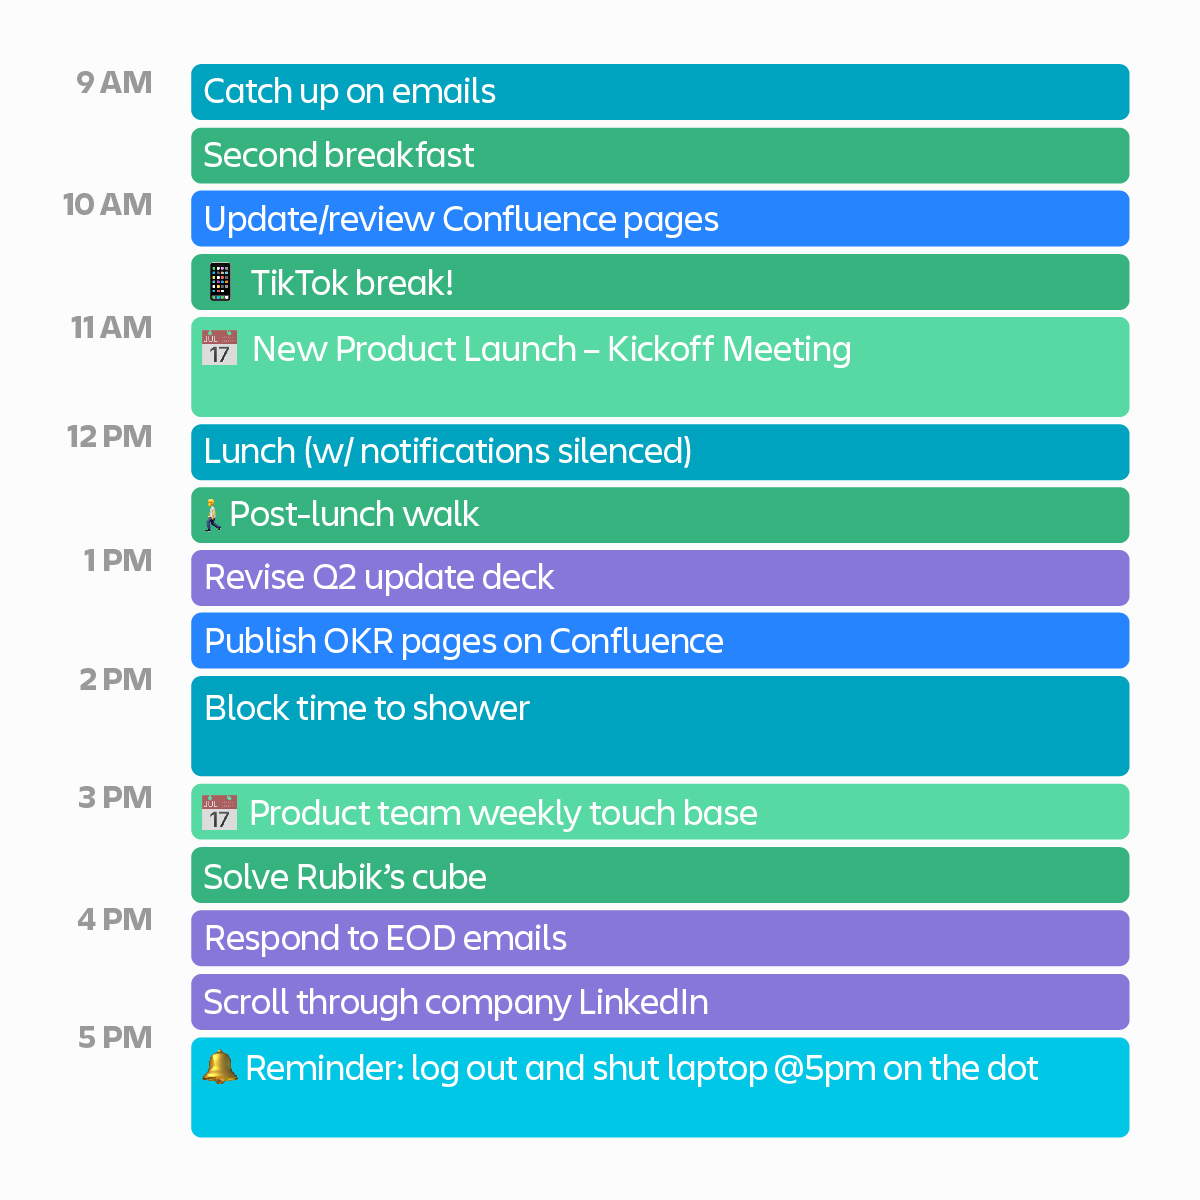 Maximize your day with time blocks. Segment tasks and find balance in your workflow. What does your perfect day look like? 🤔